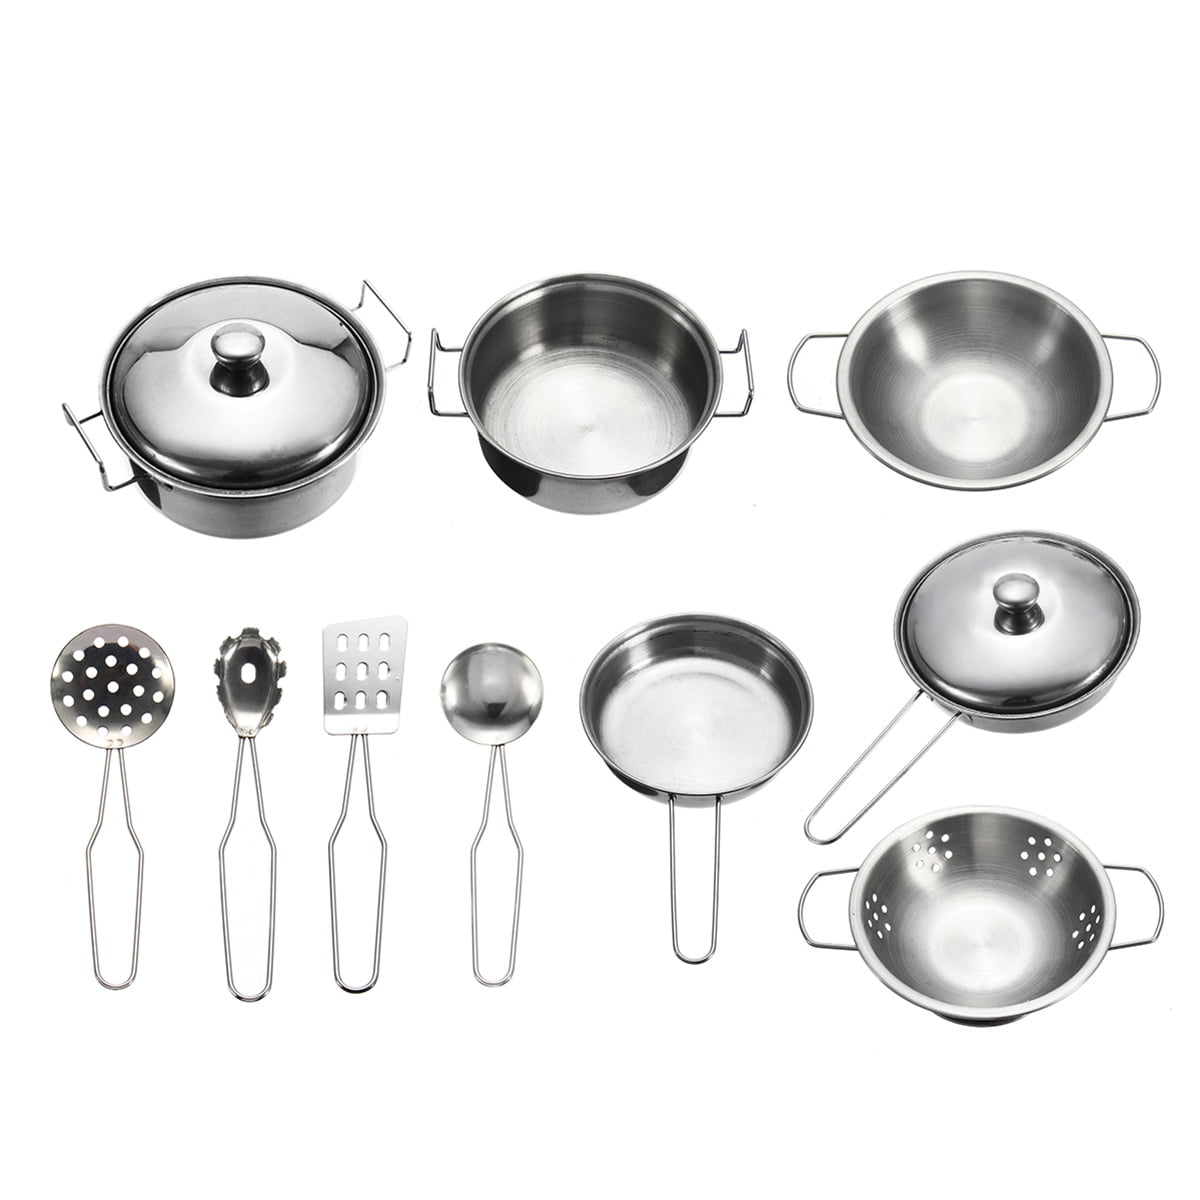 Educational Kids Kitchen Toy Set,with Stainless Steel Simulation Cook set 10Pcs 